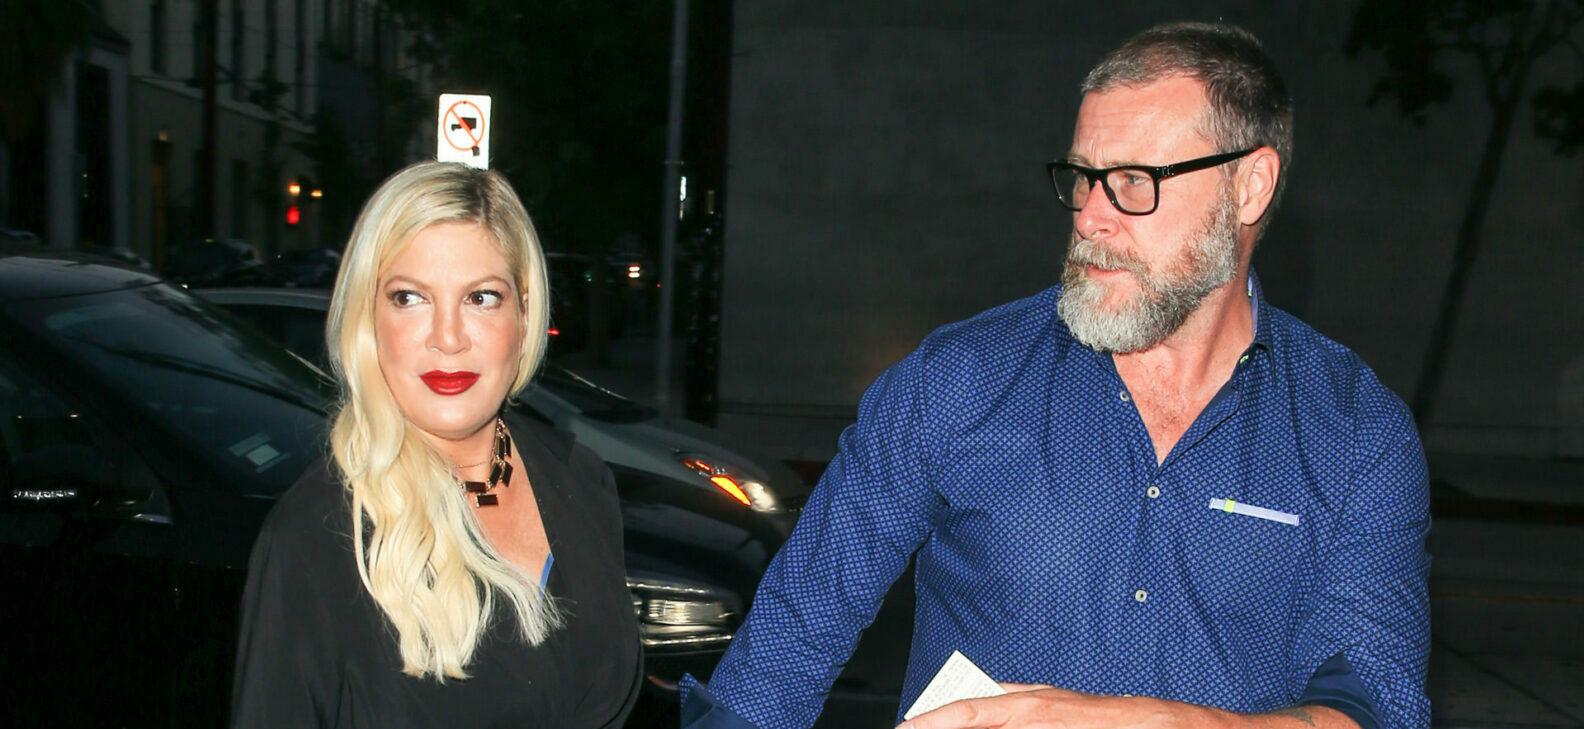 Dean McDermott Allegedly Frustrated With Tori Spelling, Hates Being ‘Made To Look Like The Bad Guy’